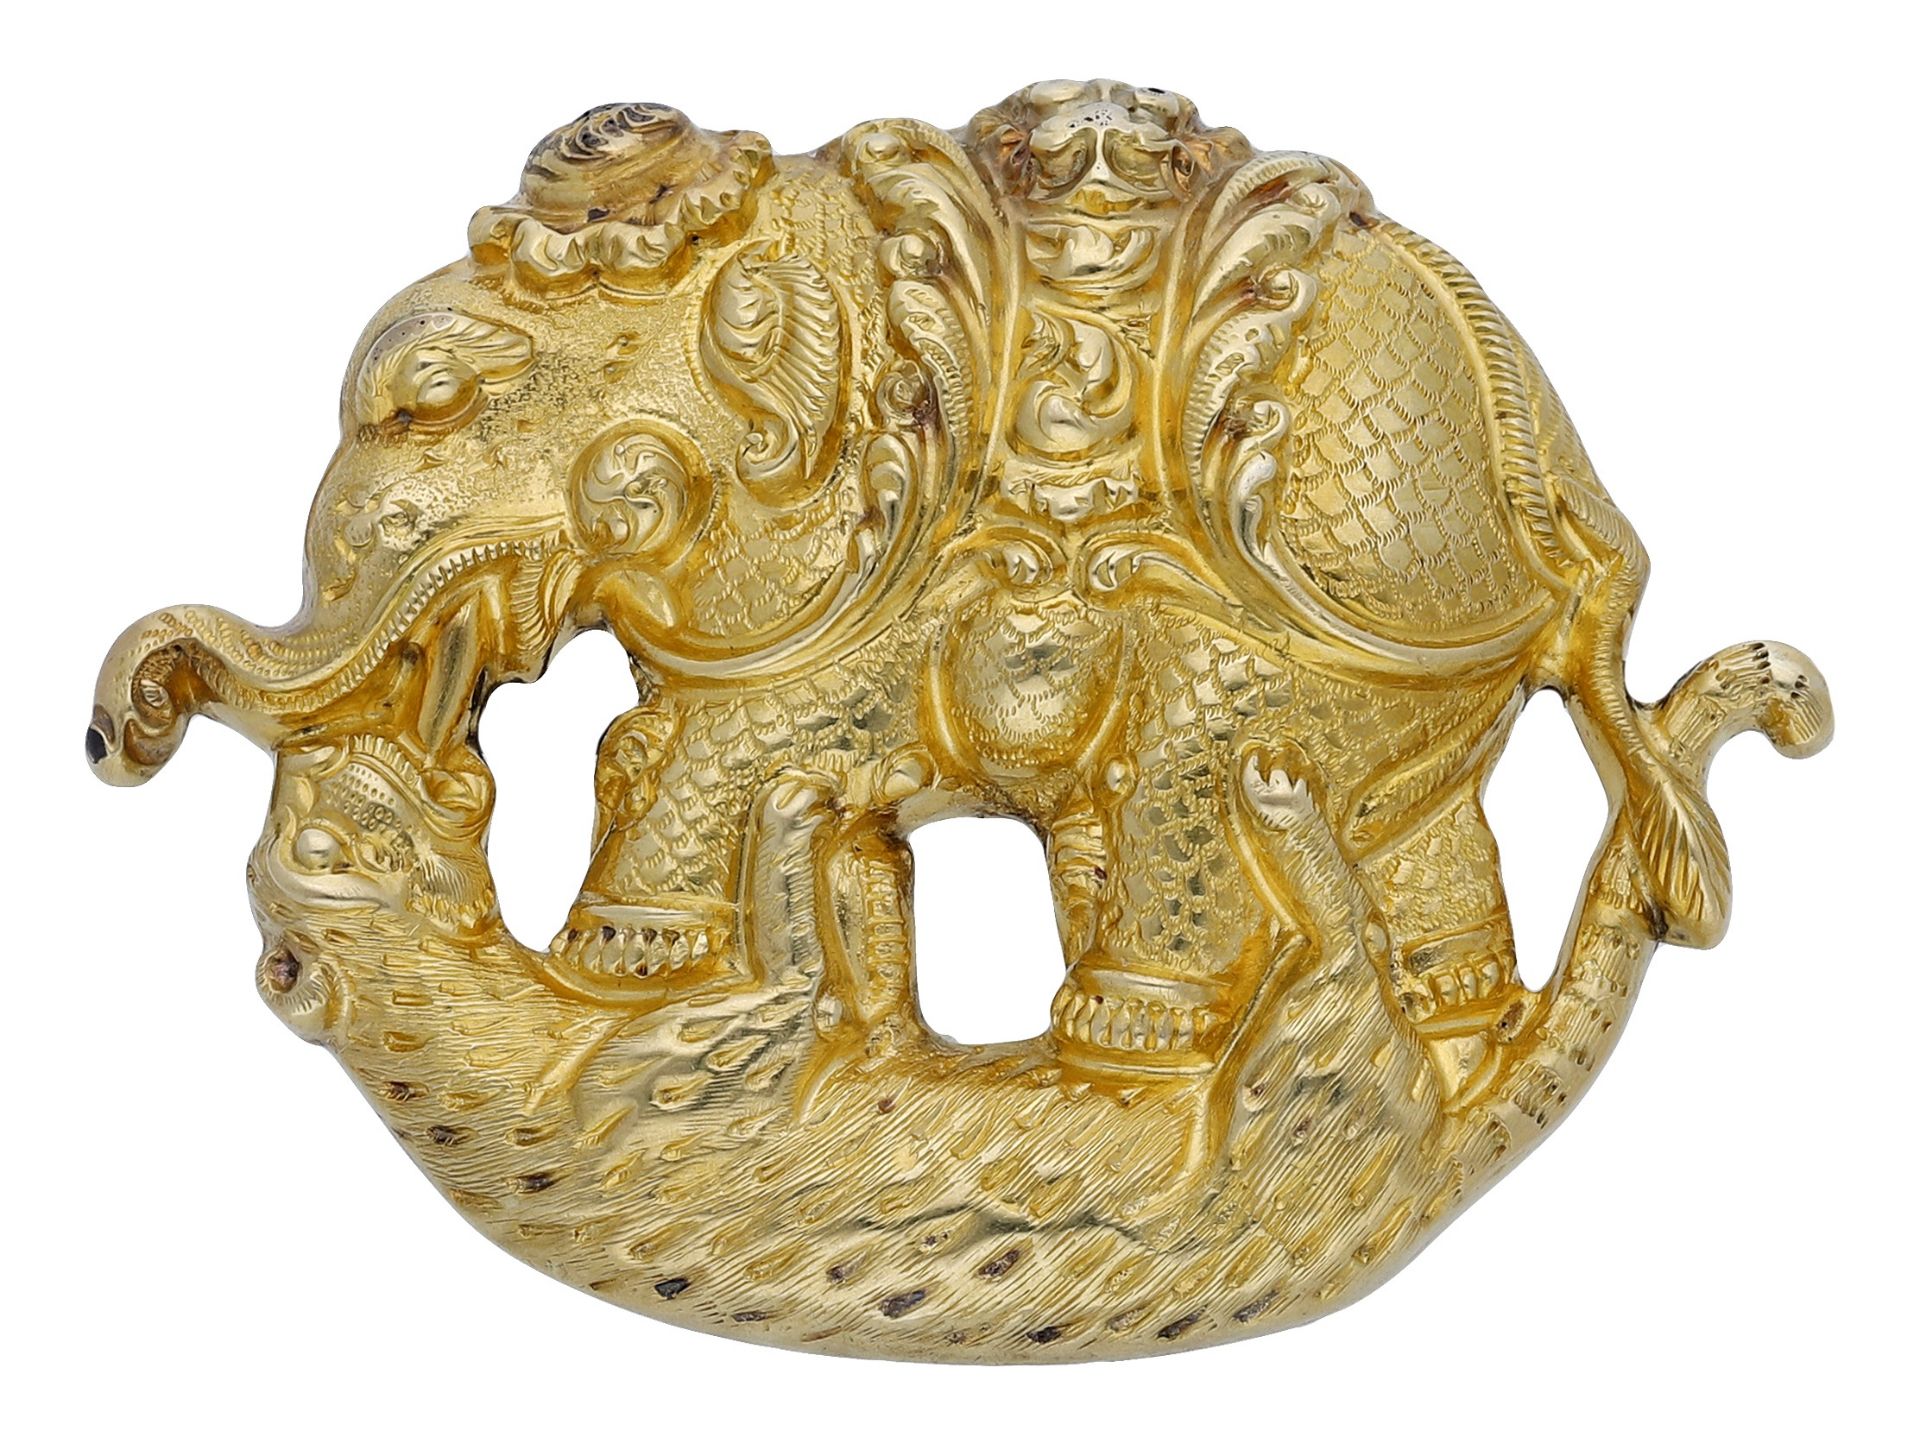 A 19th century Indian elephant and tiger brooch, the chased and engraved gold brooch formed as an...